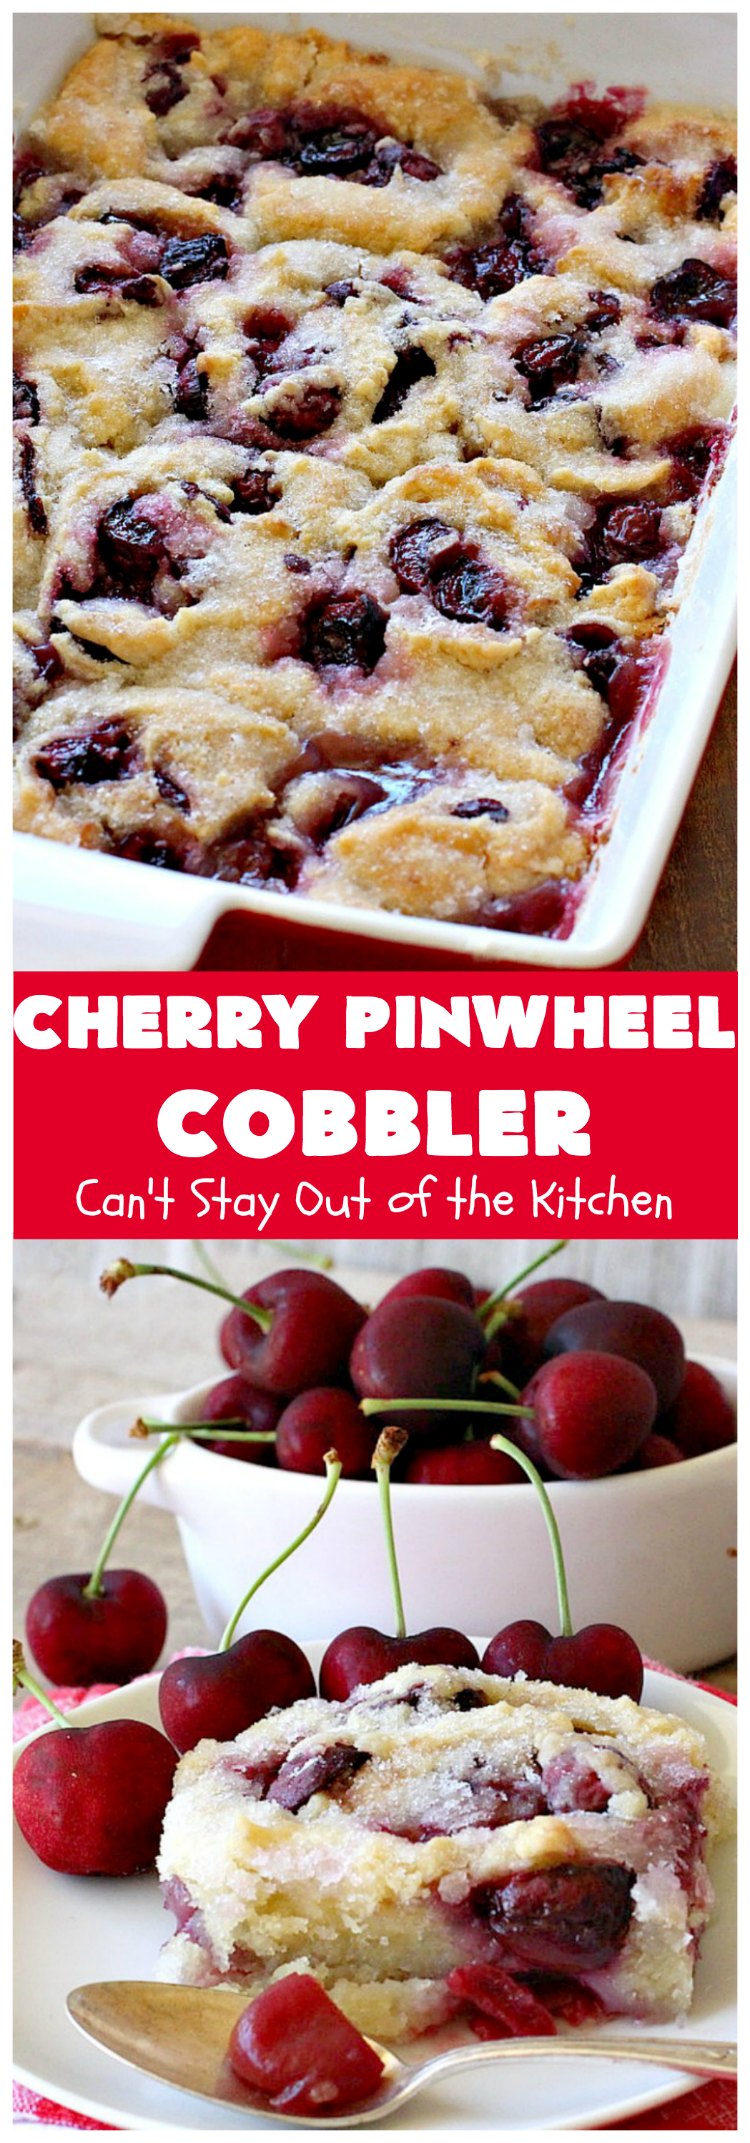 Cherry Pinwheel Cobbler | Can't Stay Out of the Kitchen